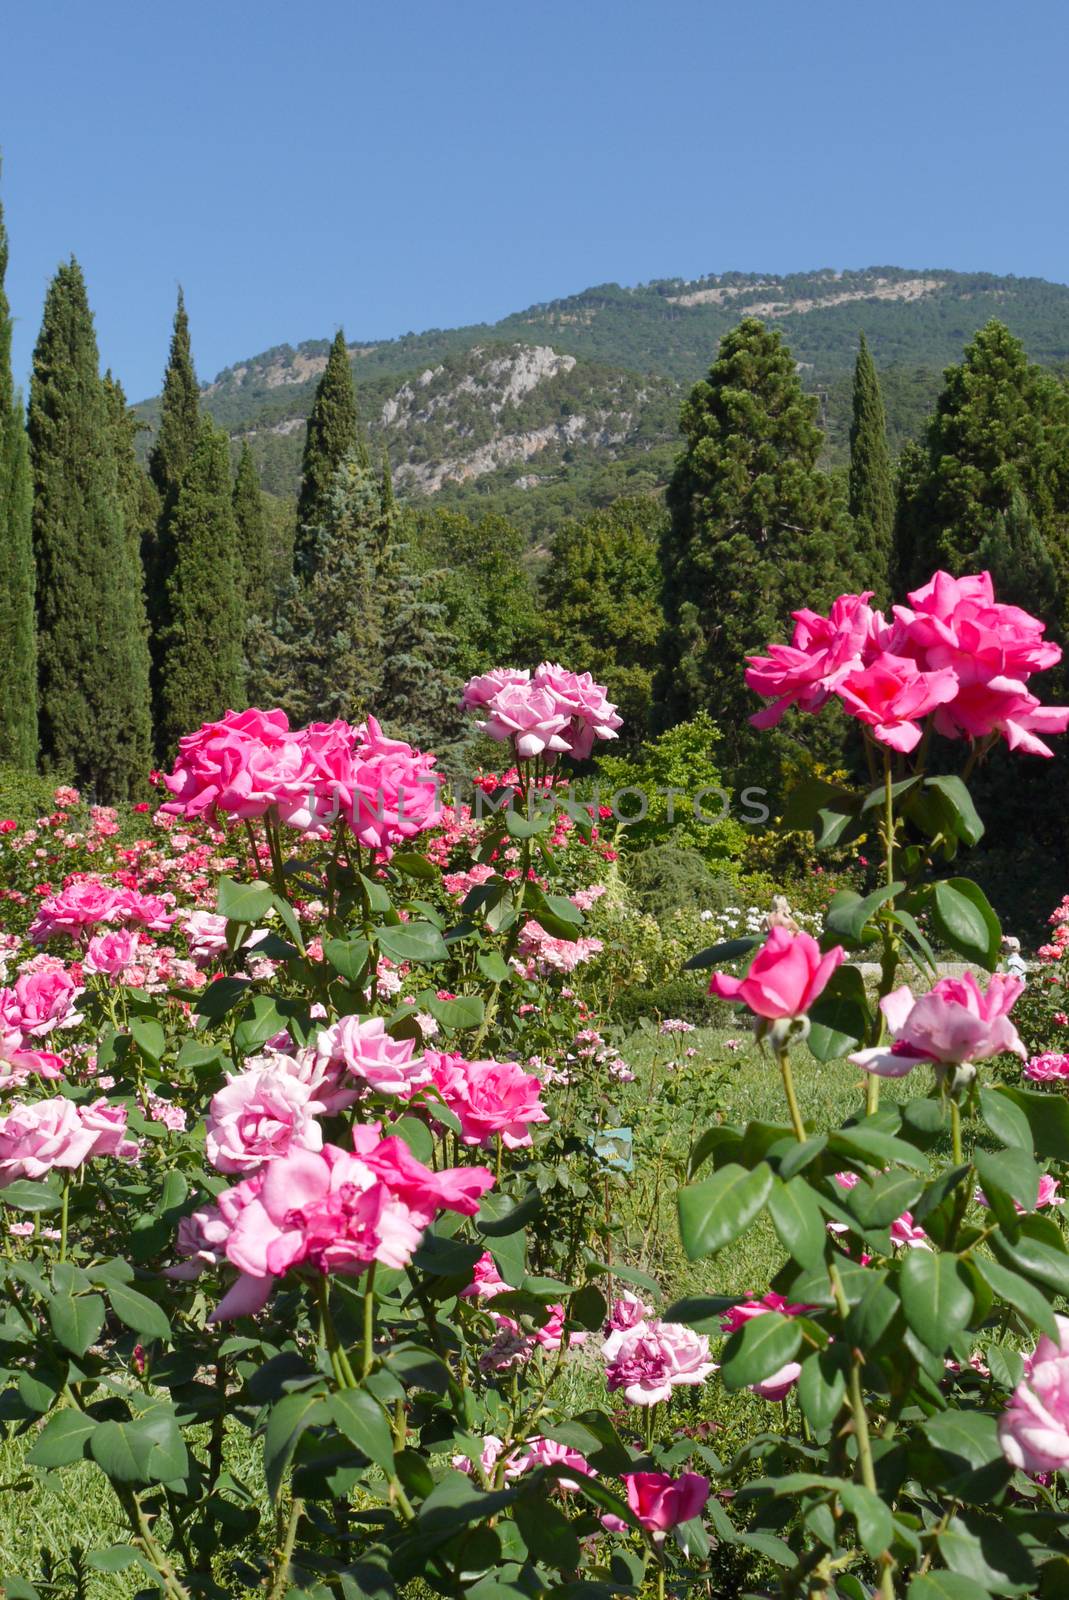 Flowerbed with large pink roses against the background of green rocky mountains